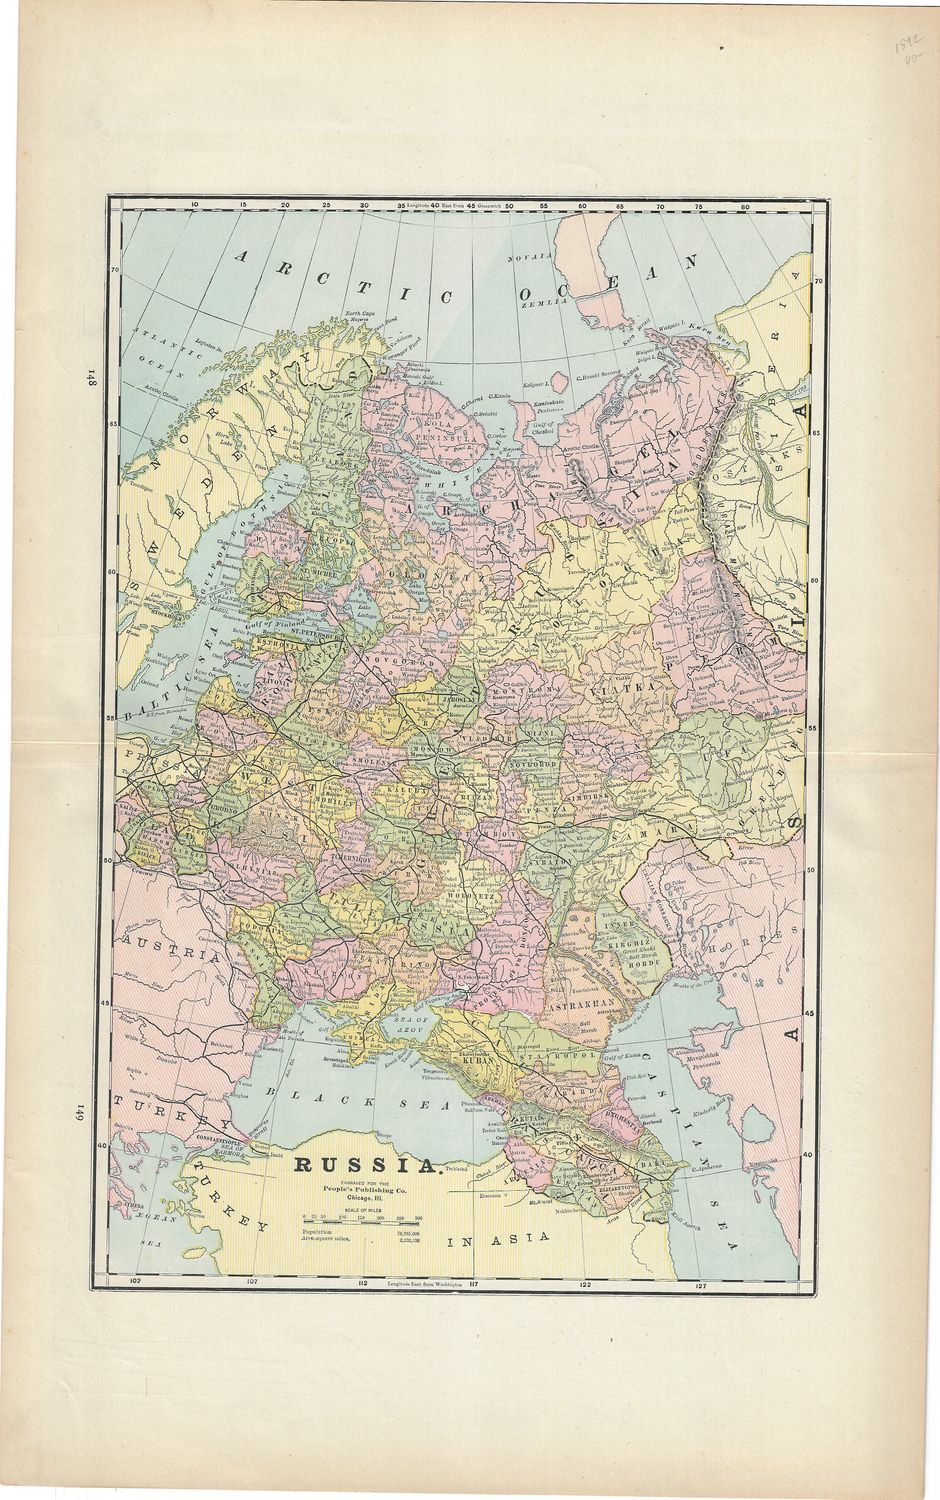 1892 Map of Russia by George Cram